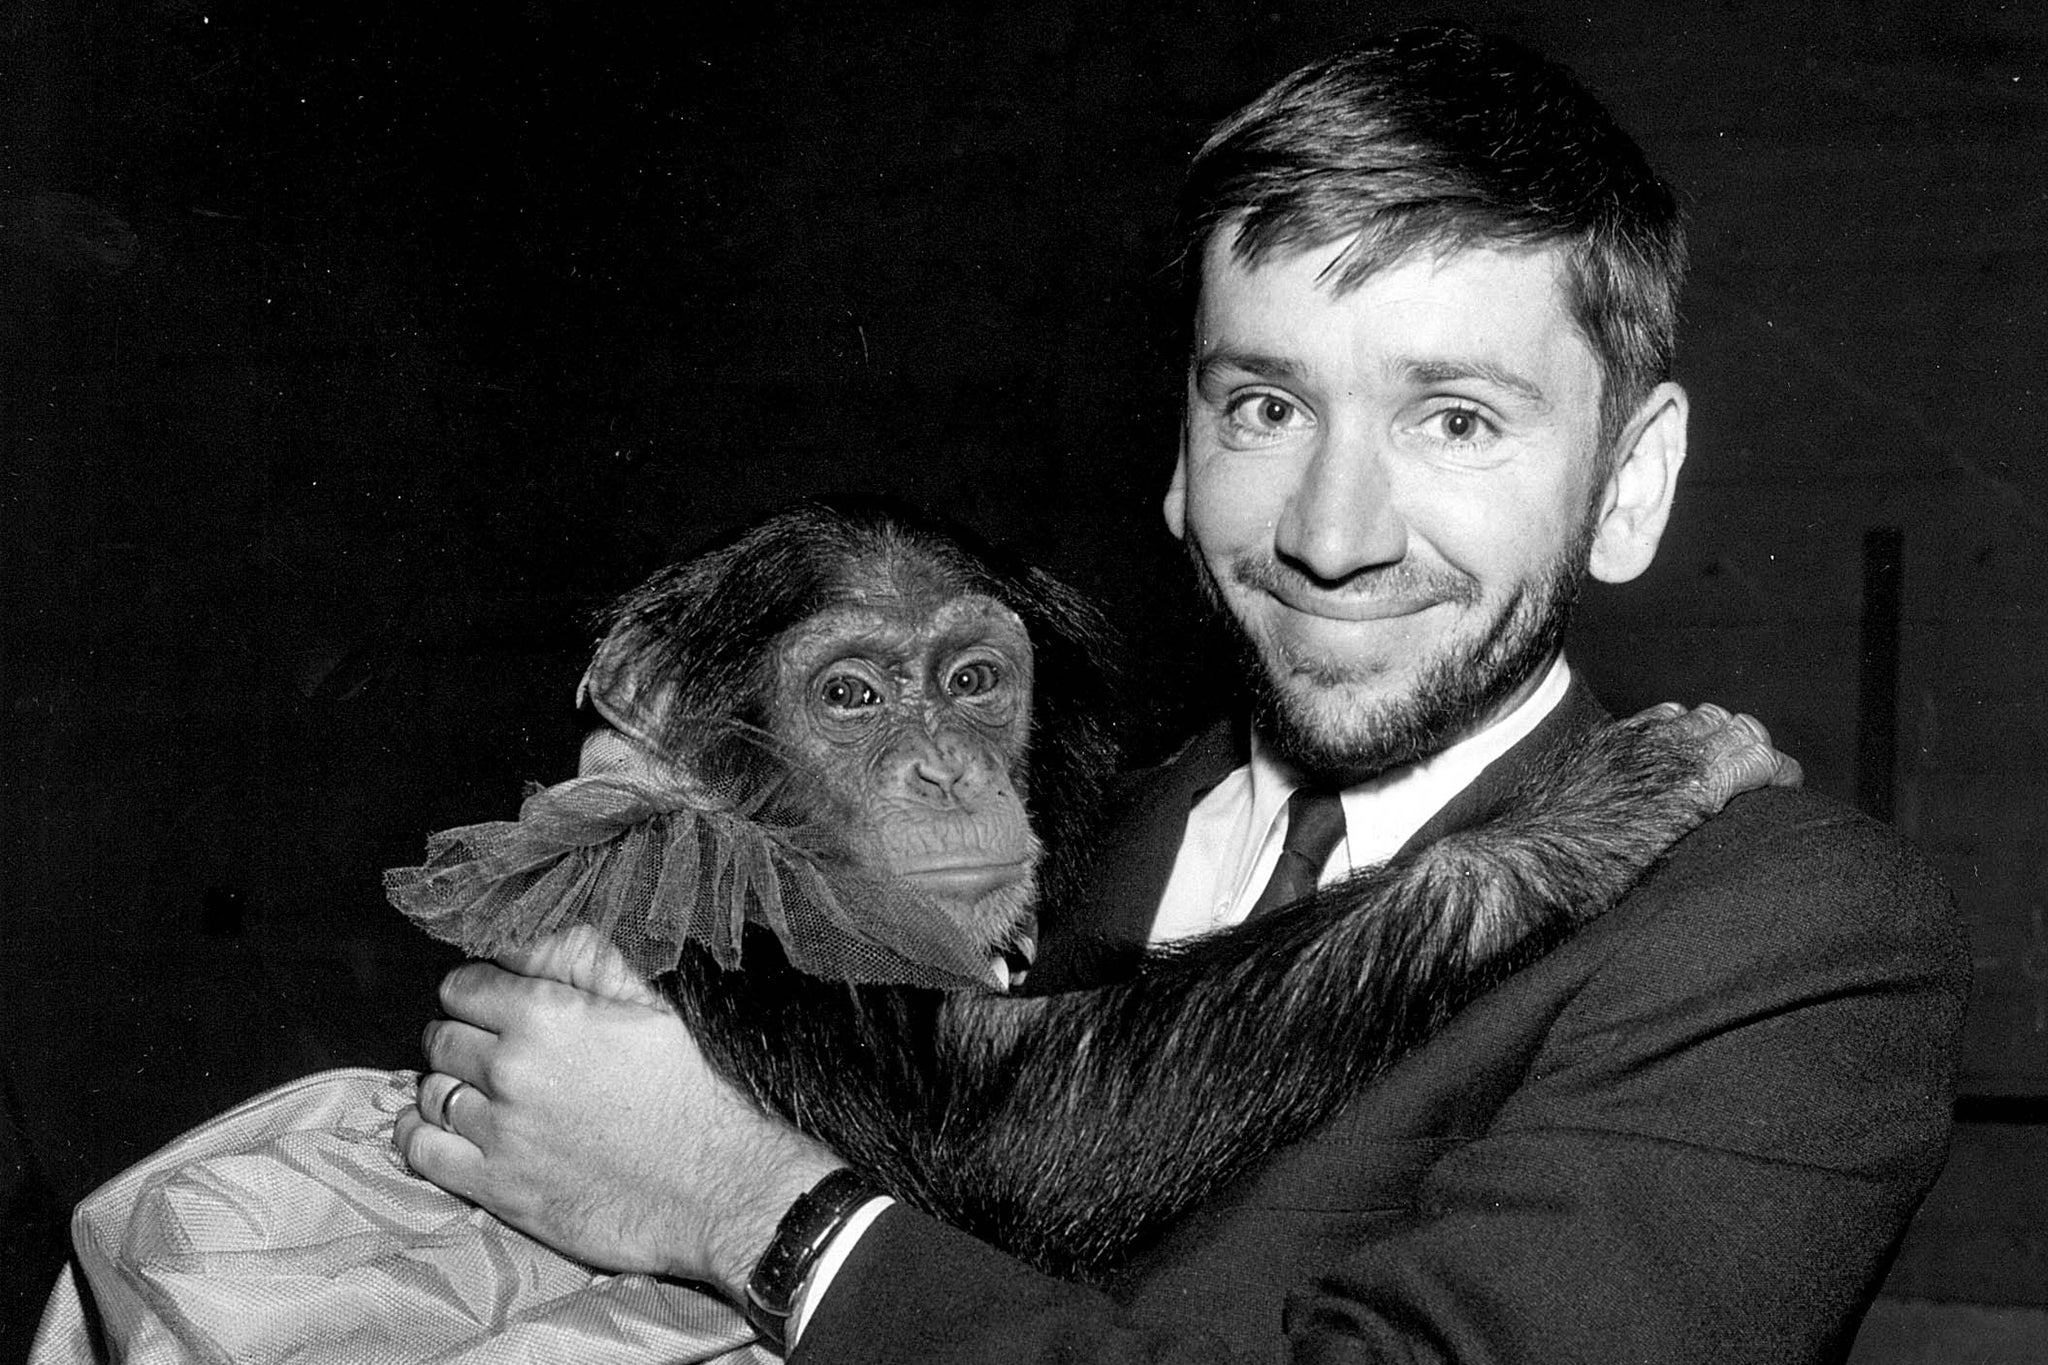 All dressed up: ‘Gilligan’s Island’ star Bob Denver poses with a presumably famous monkey at a Sixties edition of the Patsys